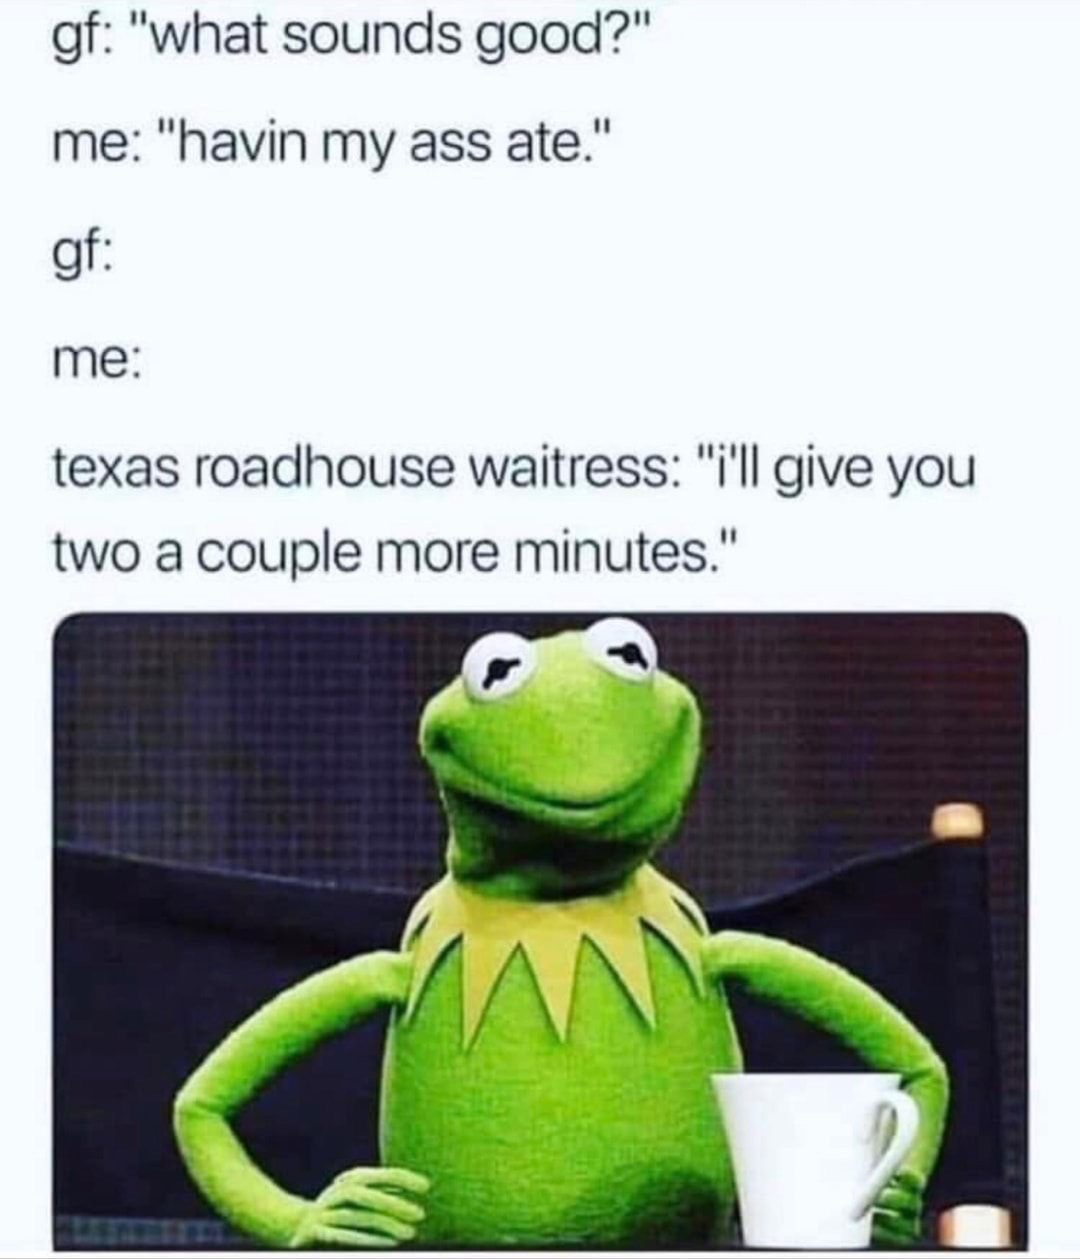 single and ready to mingle meme - gf "what sounds good?" me "havin my ass ate." gf me texas roadhouse waitress "i'll give you two a couple more minutes."